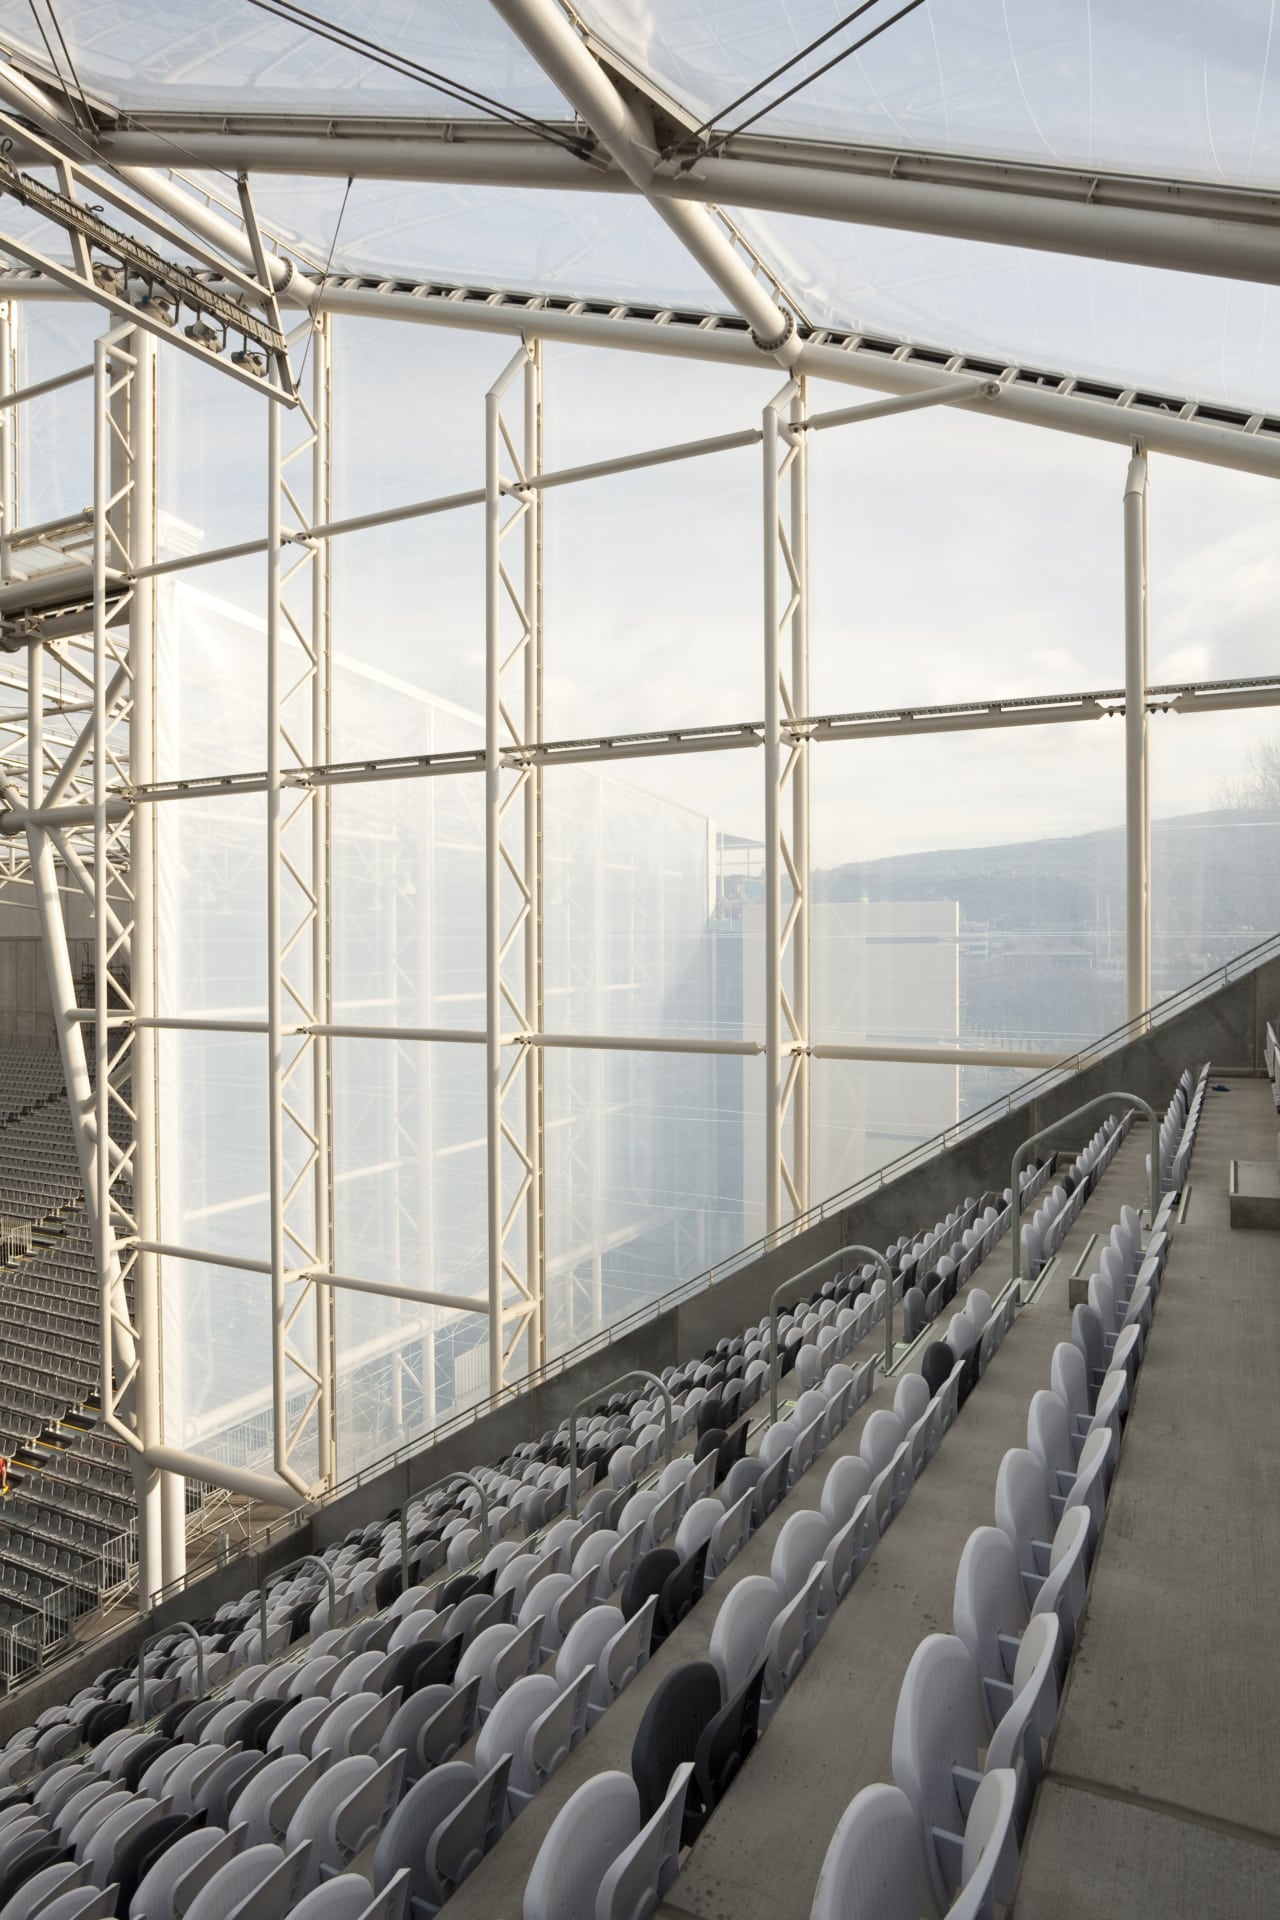 At Forsyth Barr Stadium, the Texlon® ETFE system completely envelopes the building with a lightweight structure. 